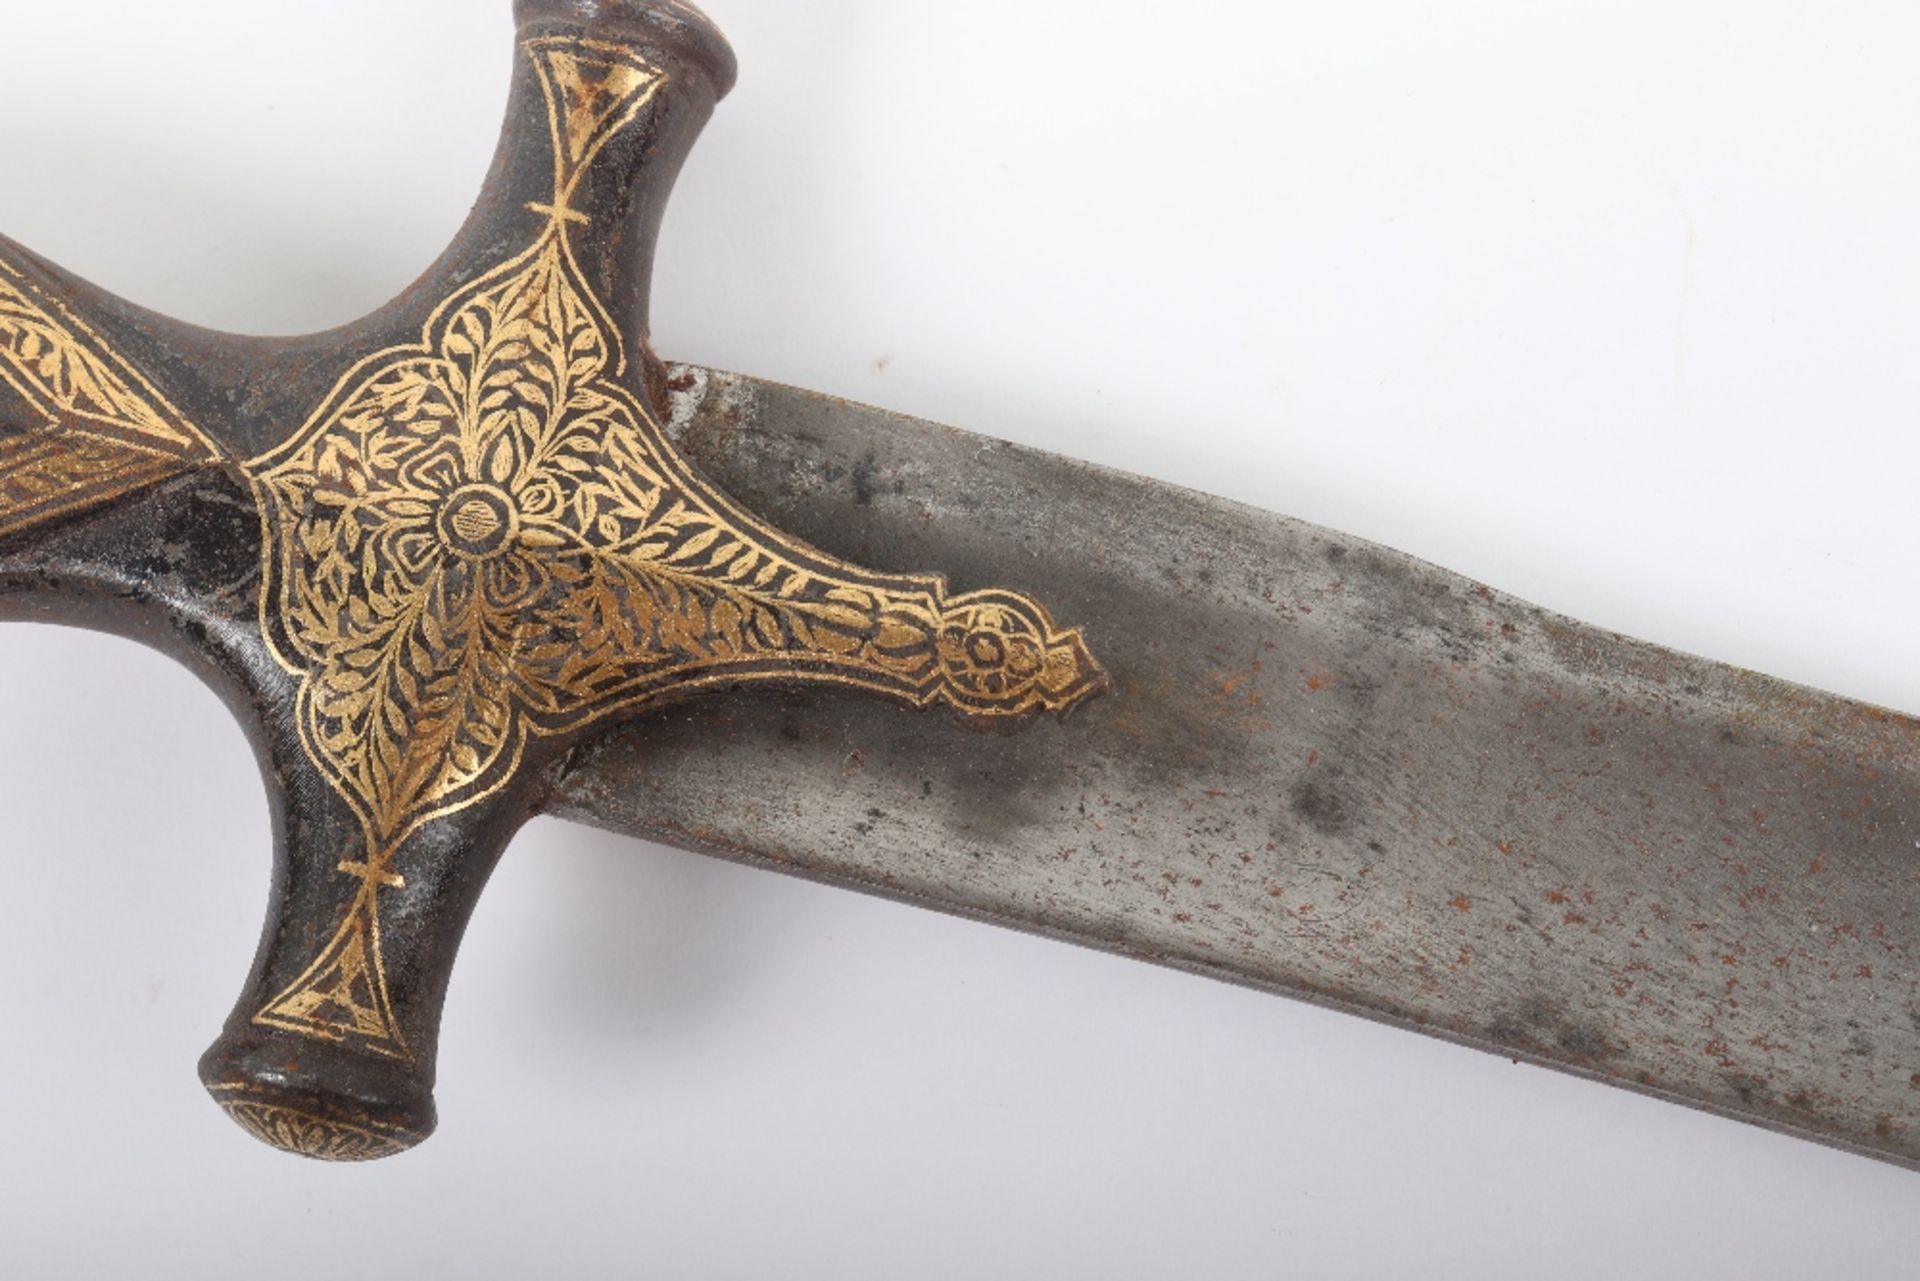 Decorative Indian Sword Tulwar Perhaps for a Youth - Image 11 of 13